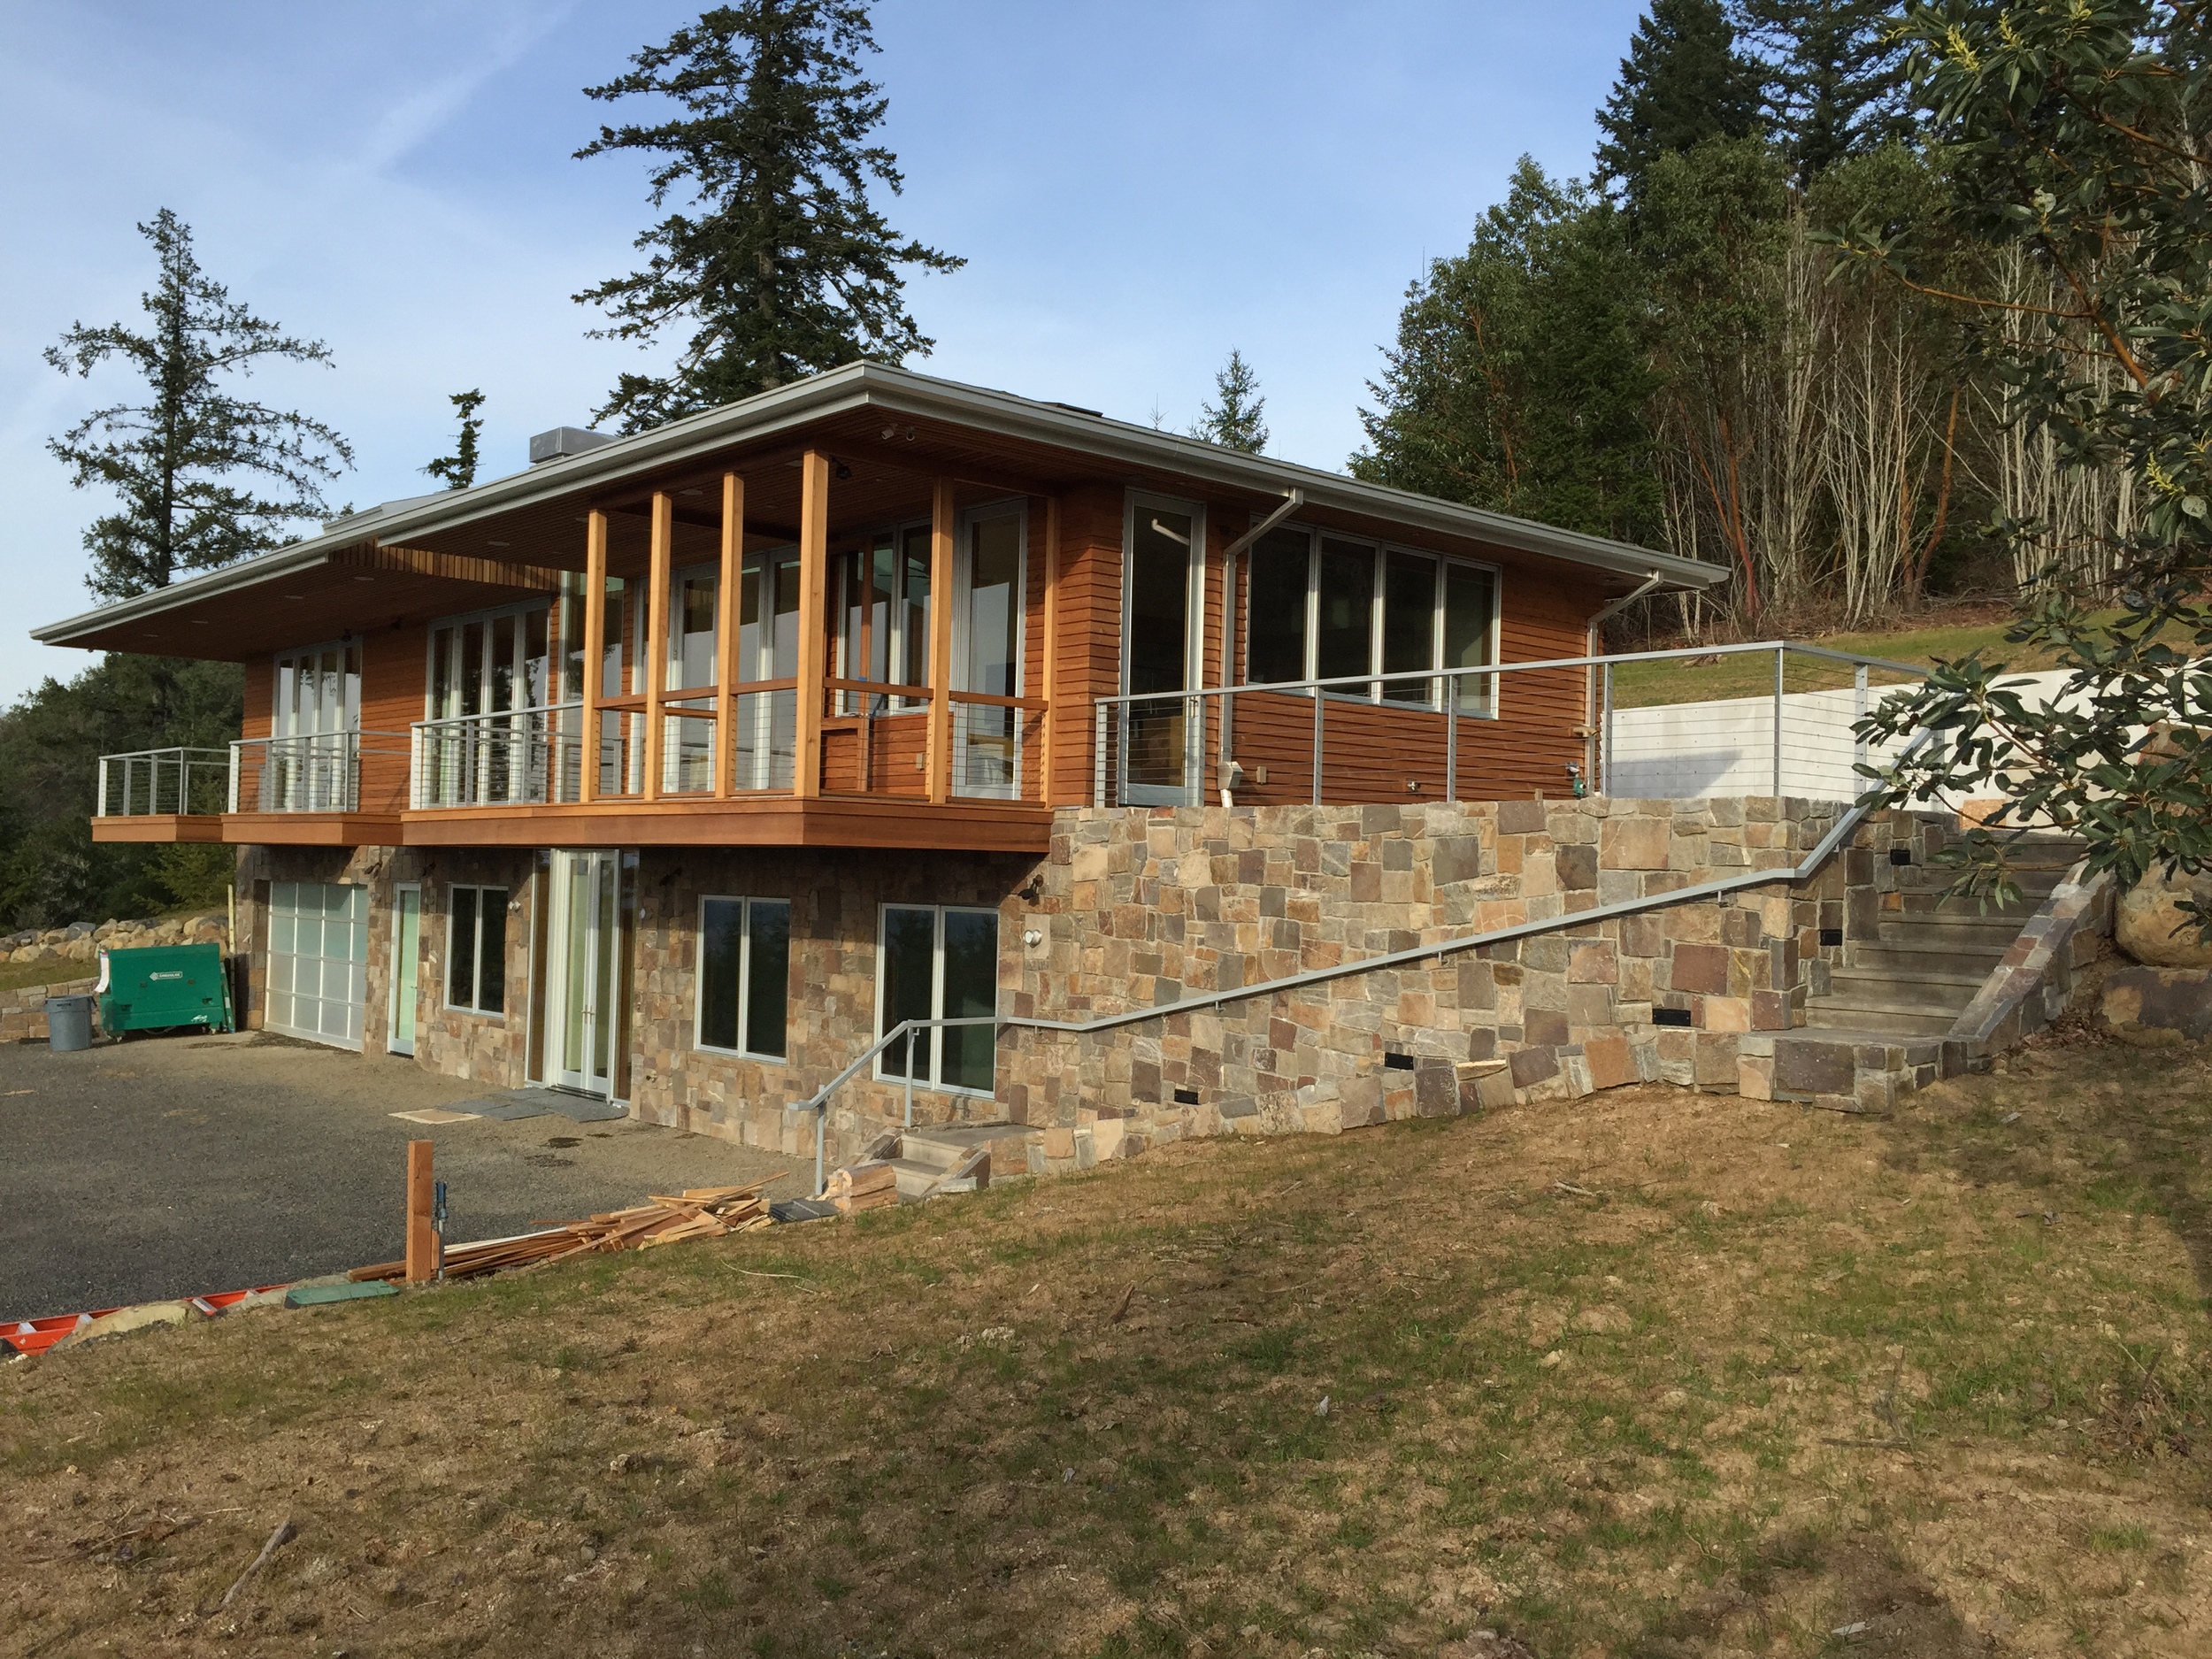  3 decks and a stone wall with steel railing with stainless cable infill.  Designed by Pete Retondo Architecture 